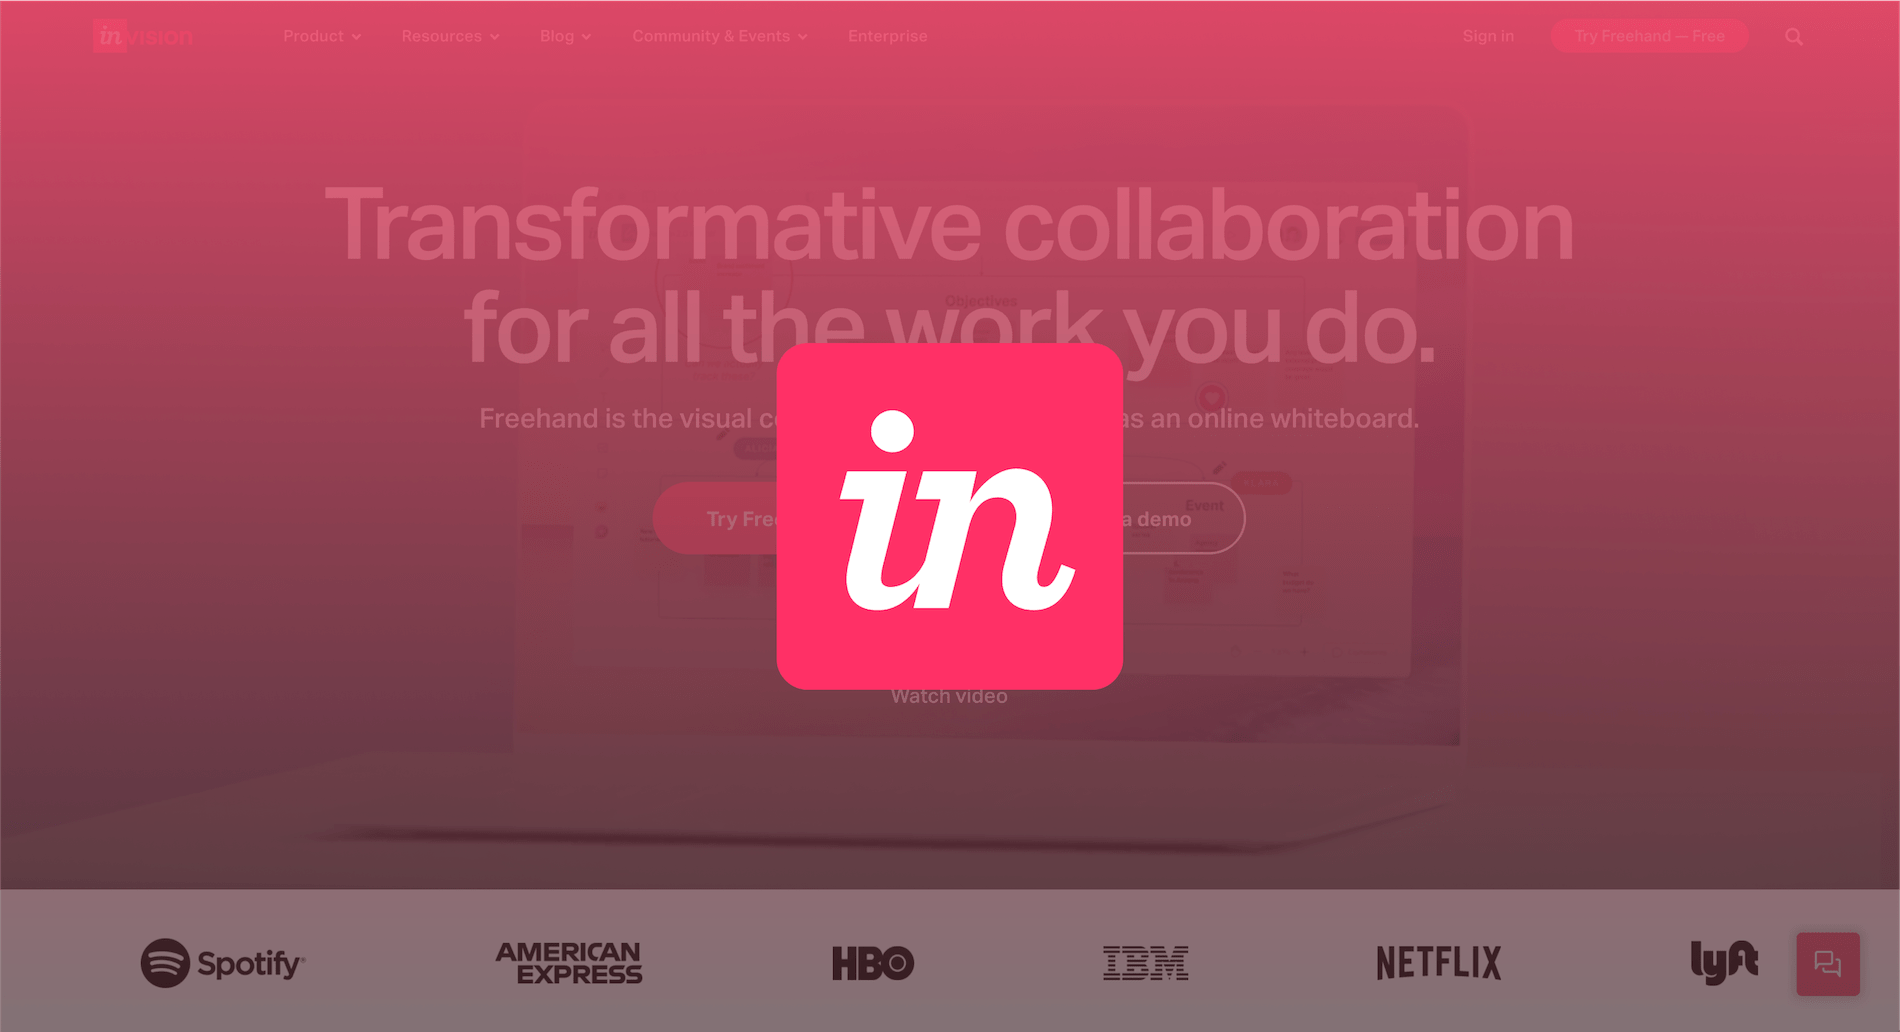 The Invision homepage